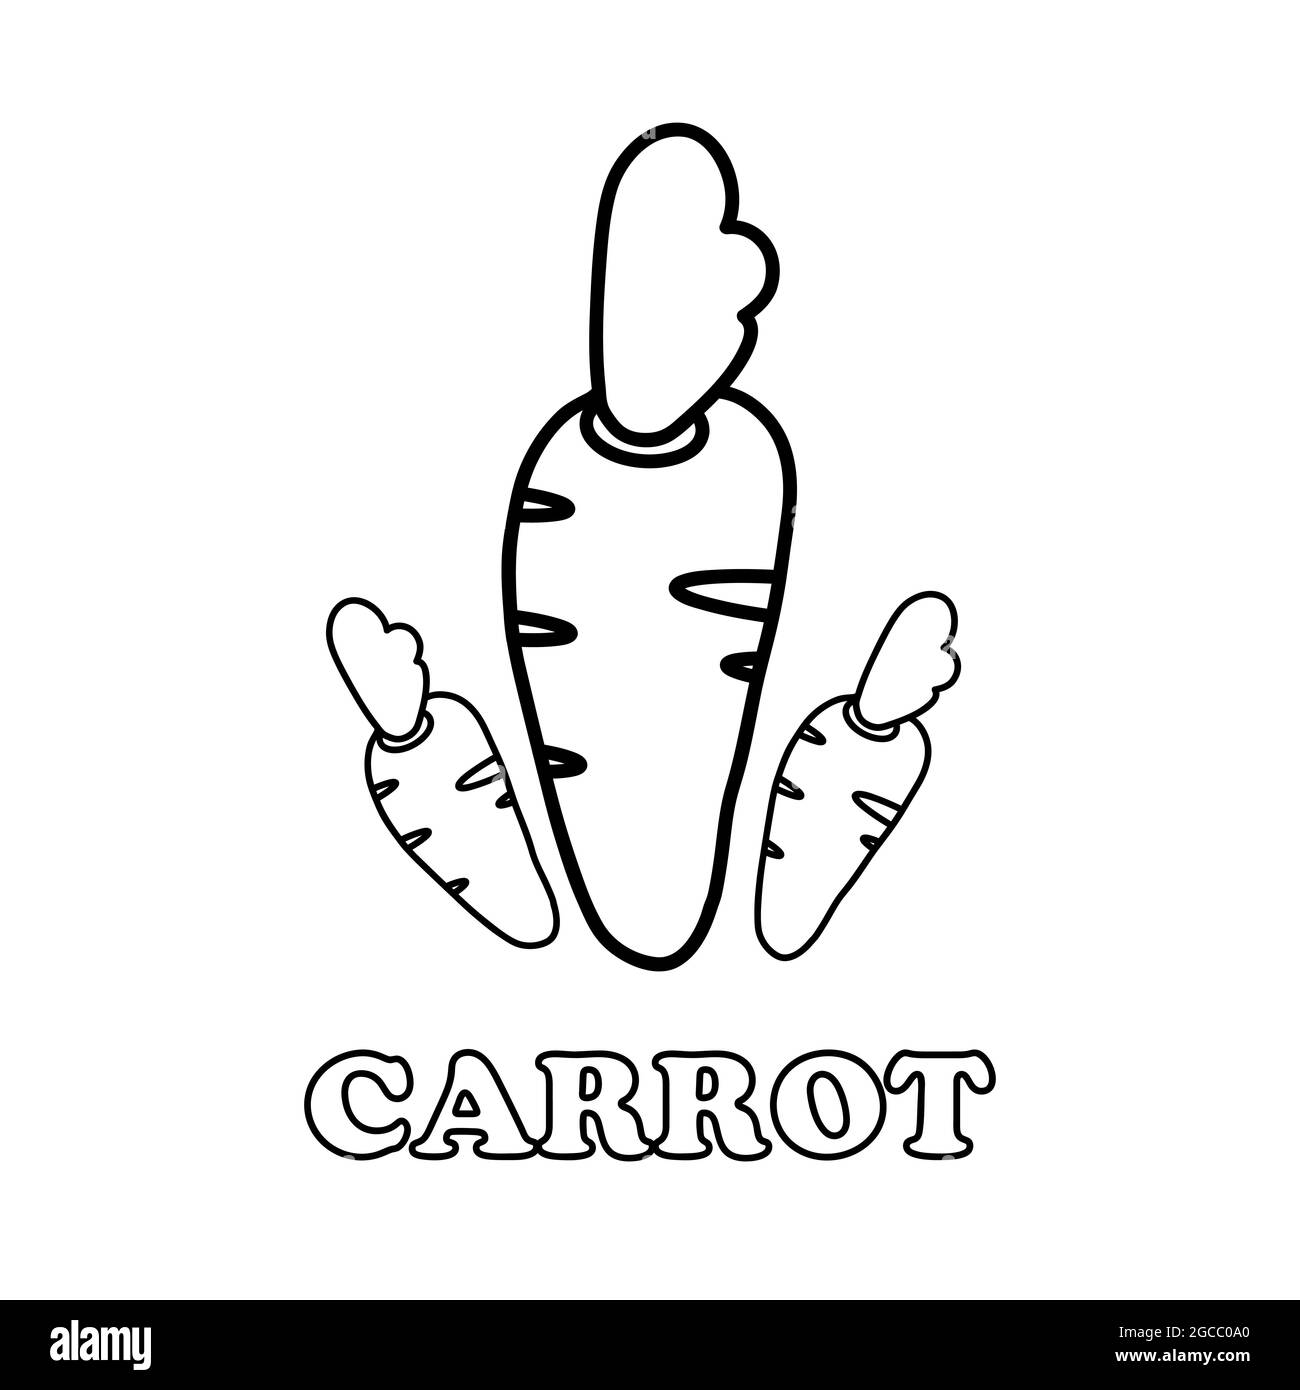 carrot coloring page. healthy food coloring page for children on white background Stock Photo